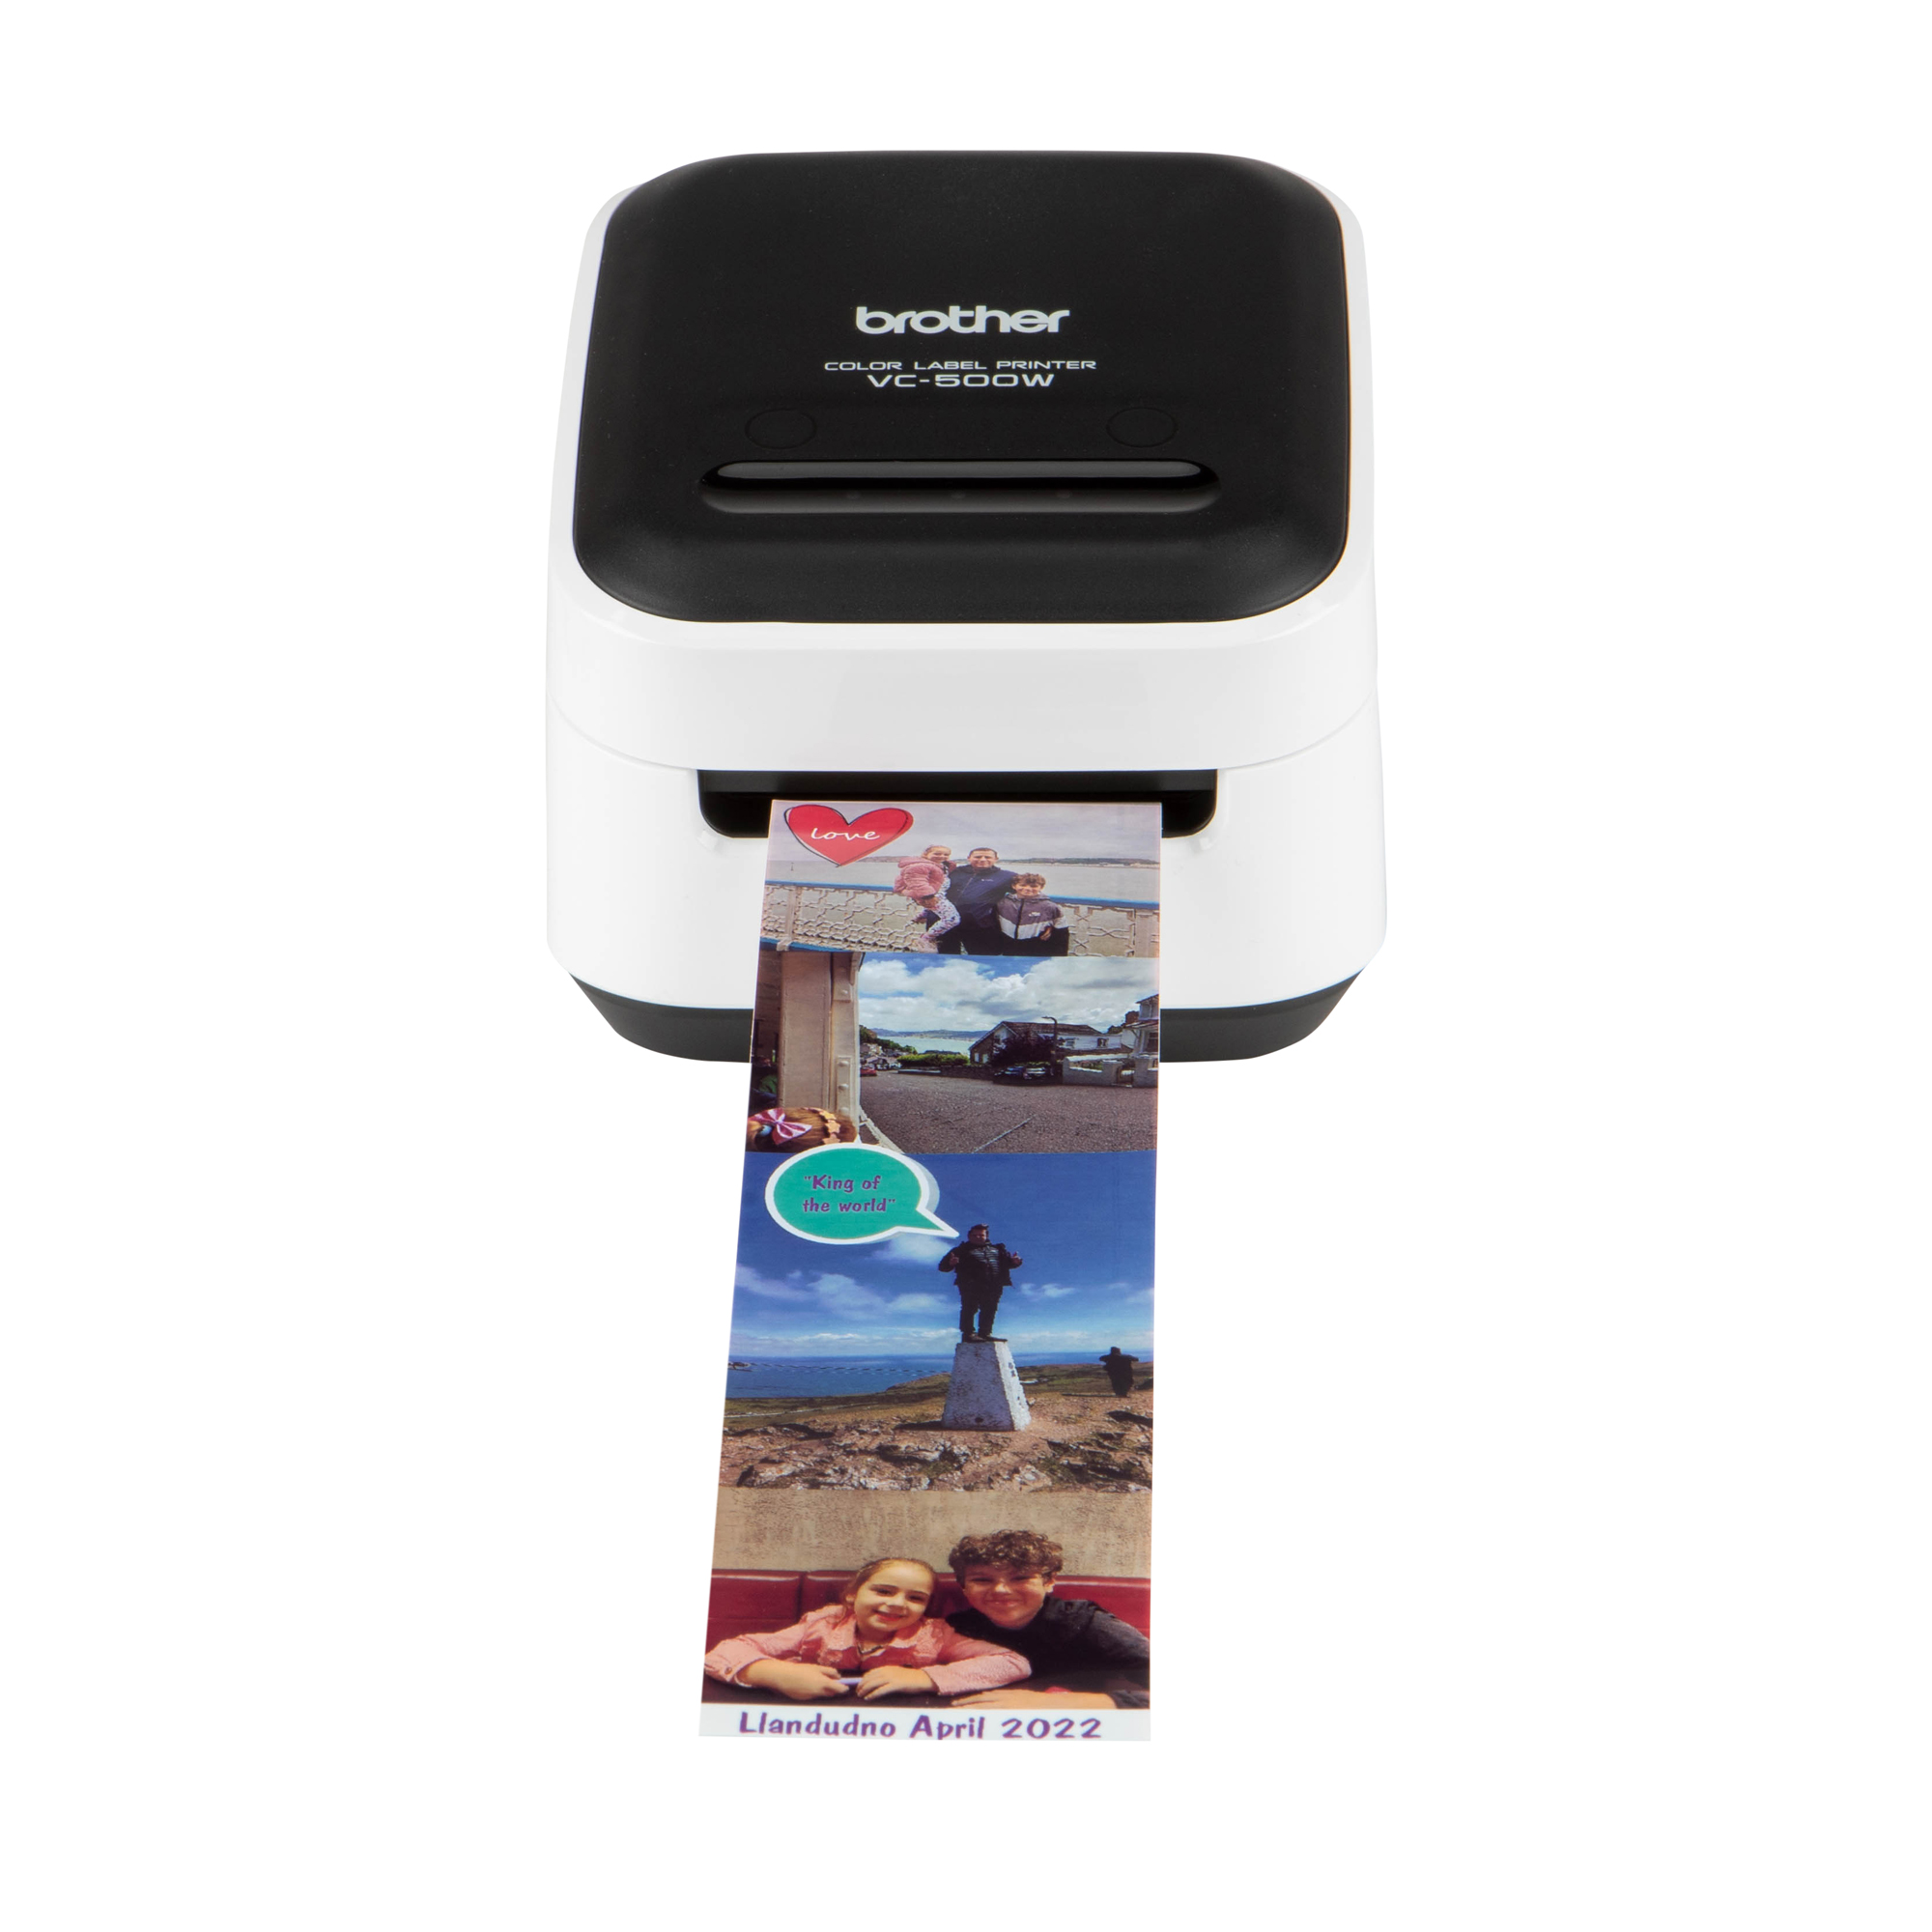 Brother VC-500W printing color photo